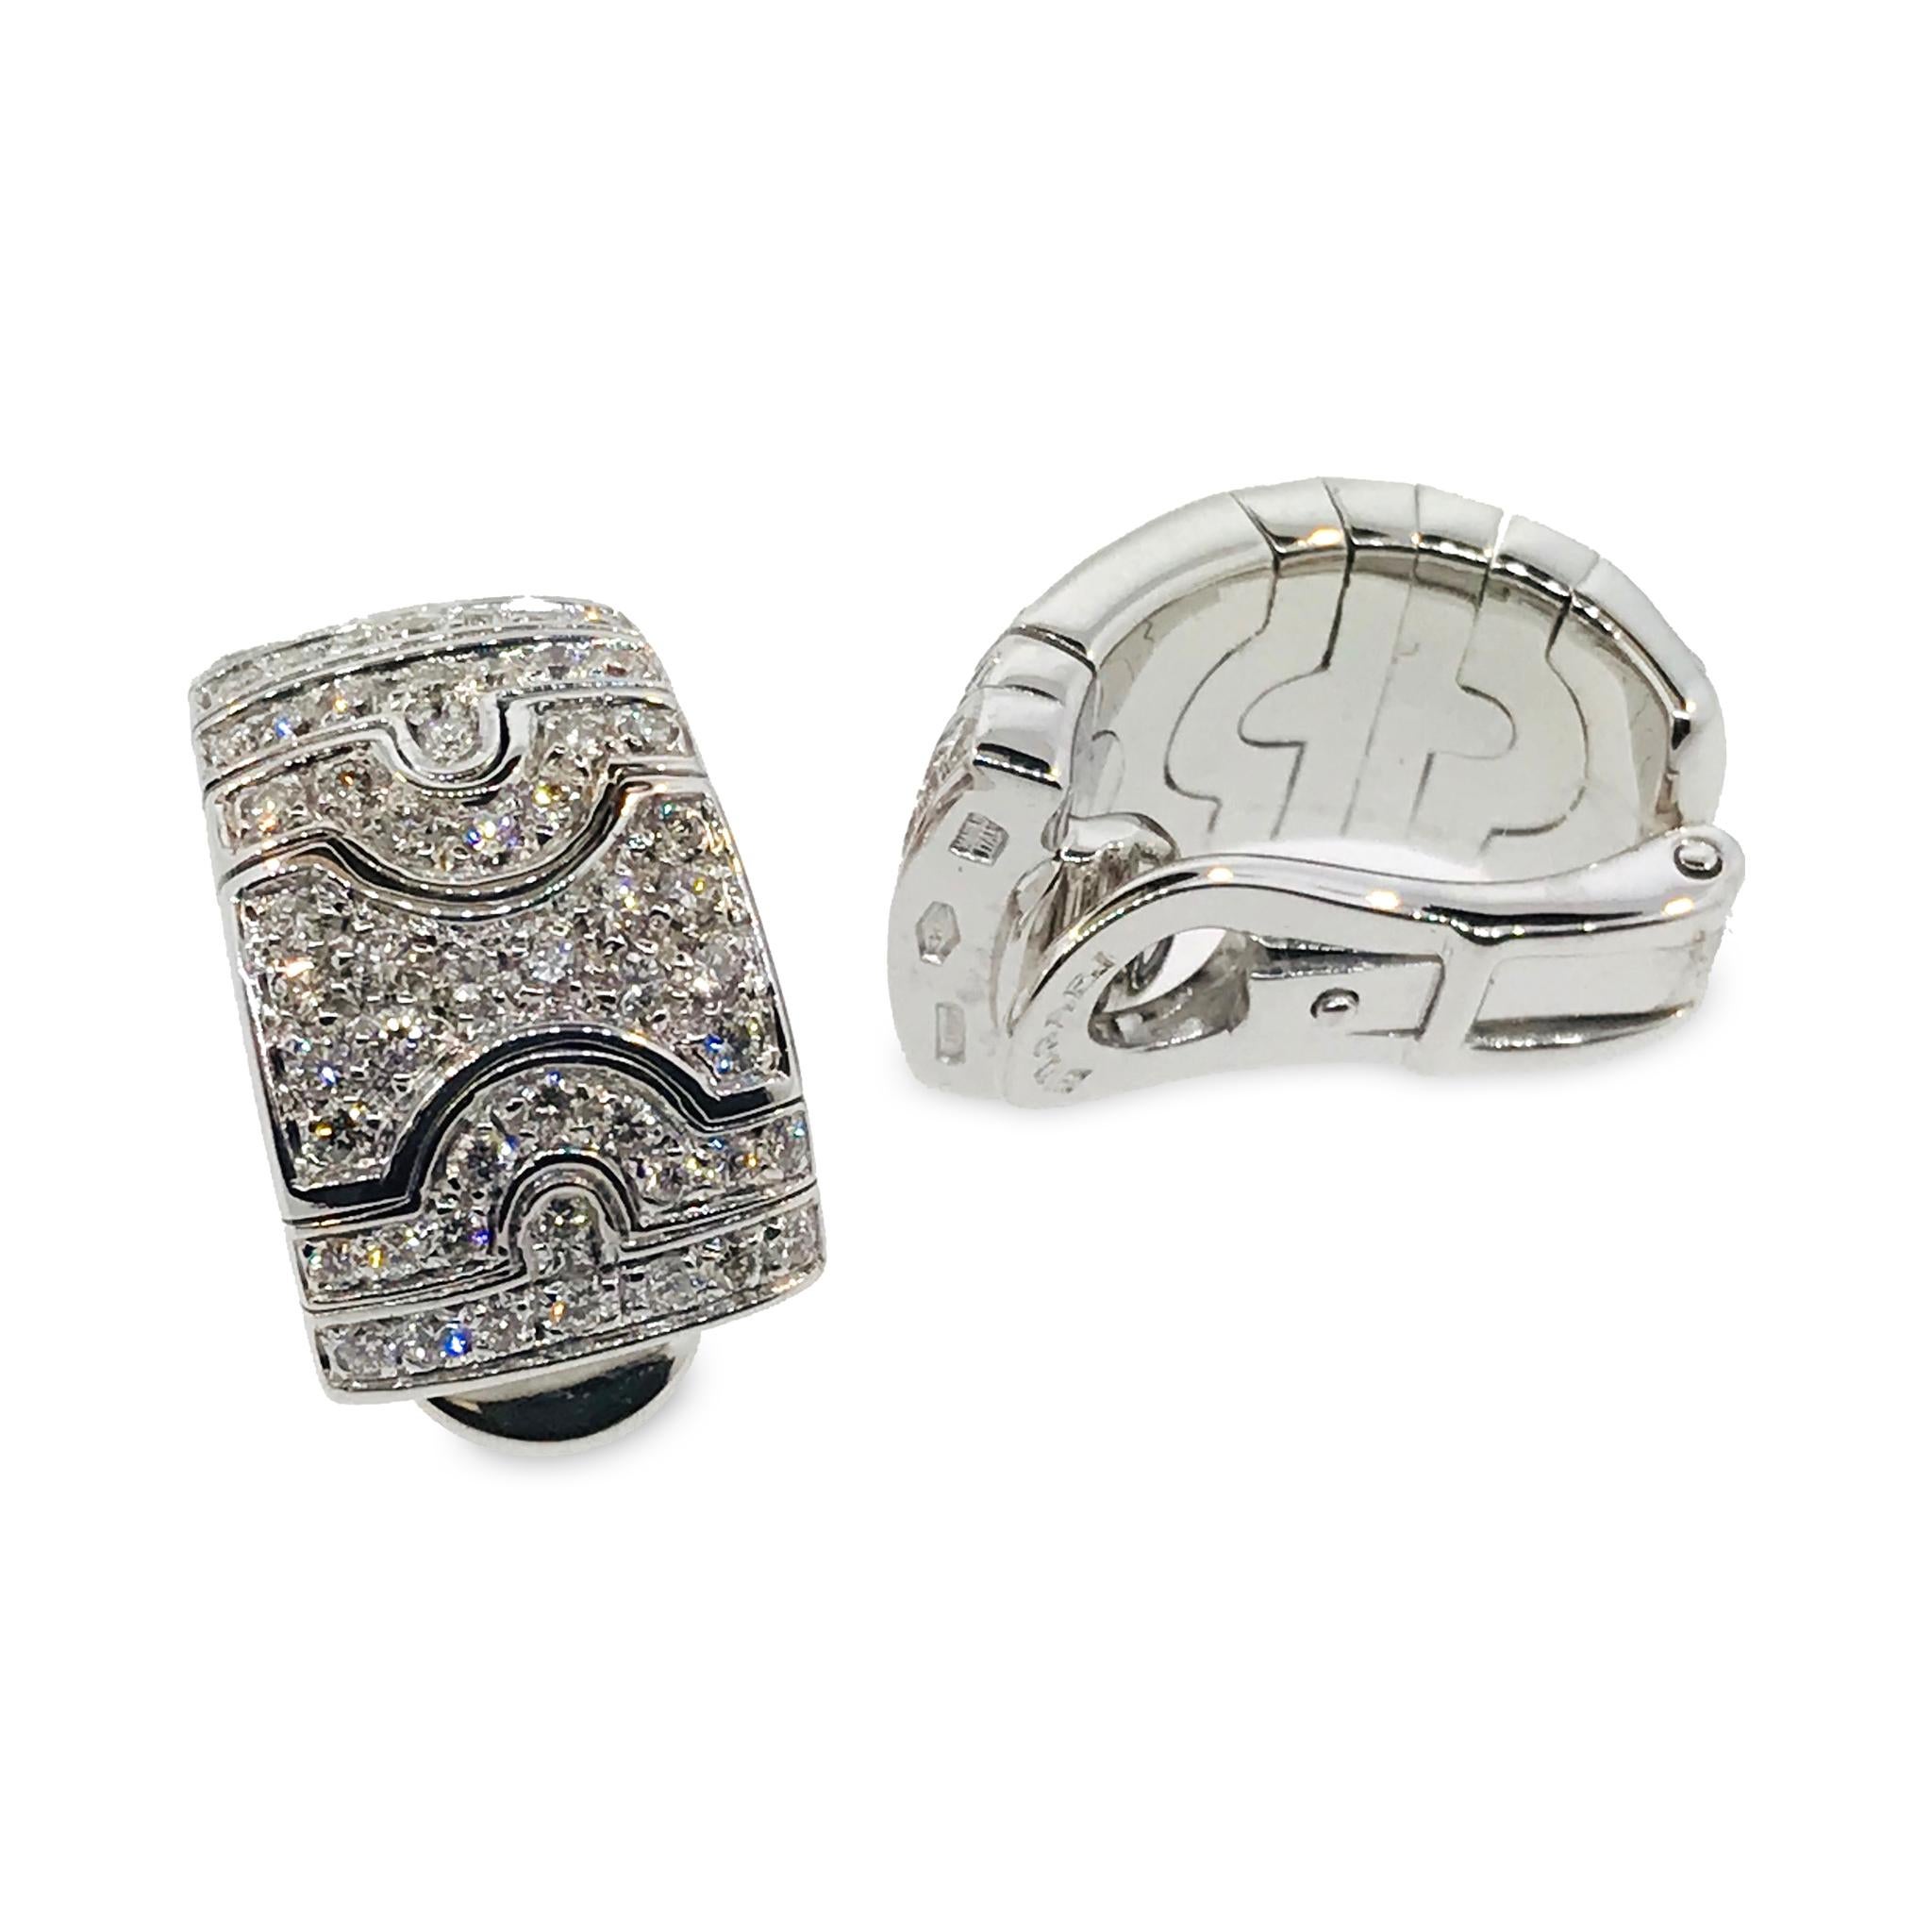 METAL TYPE: 18K White Gold
STONE WEIGHT: 2ct twd
TOTAL WEIGHT: 18.1g
REFERENCE #: 21581-ACAX
CONDITION: Pre-owned, Excellent condition.